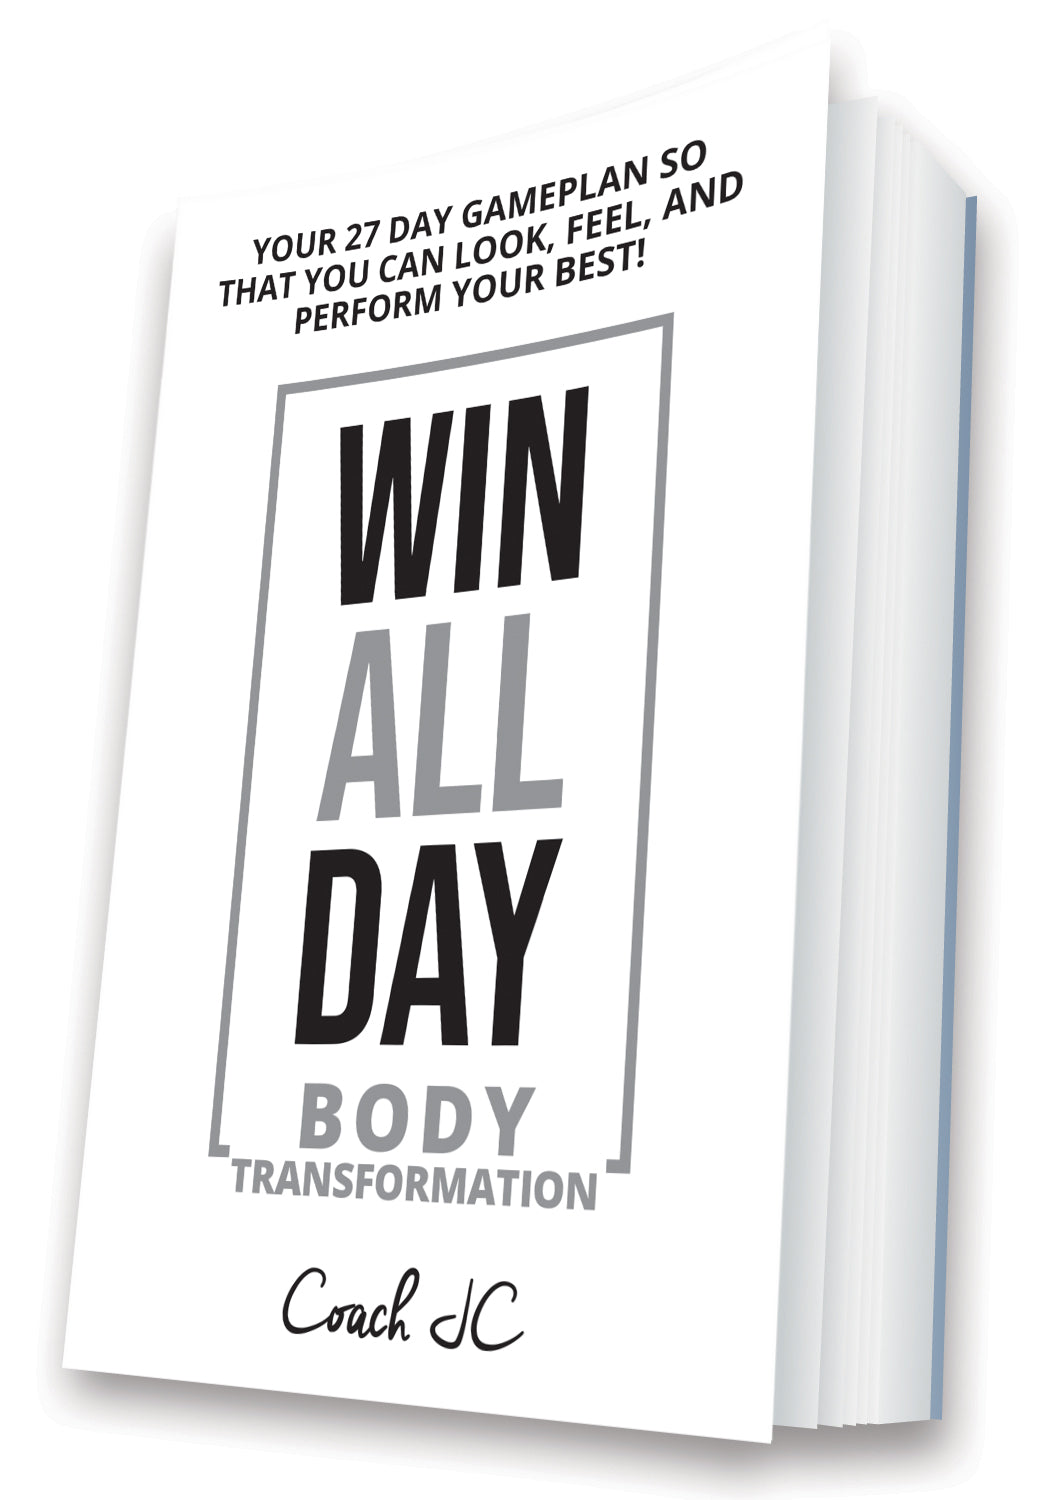 WIN ALL DAY - YOUR 27 DAY GAMEPLAN SO THAT YOU CAN LOOK FEEL AND PERFORM YOUR BEST!